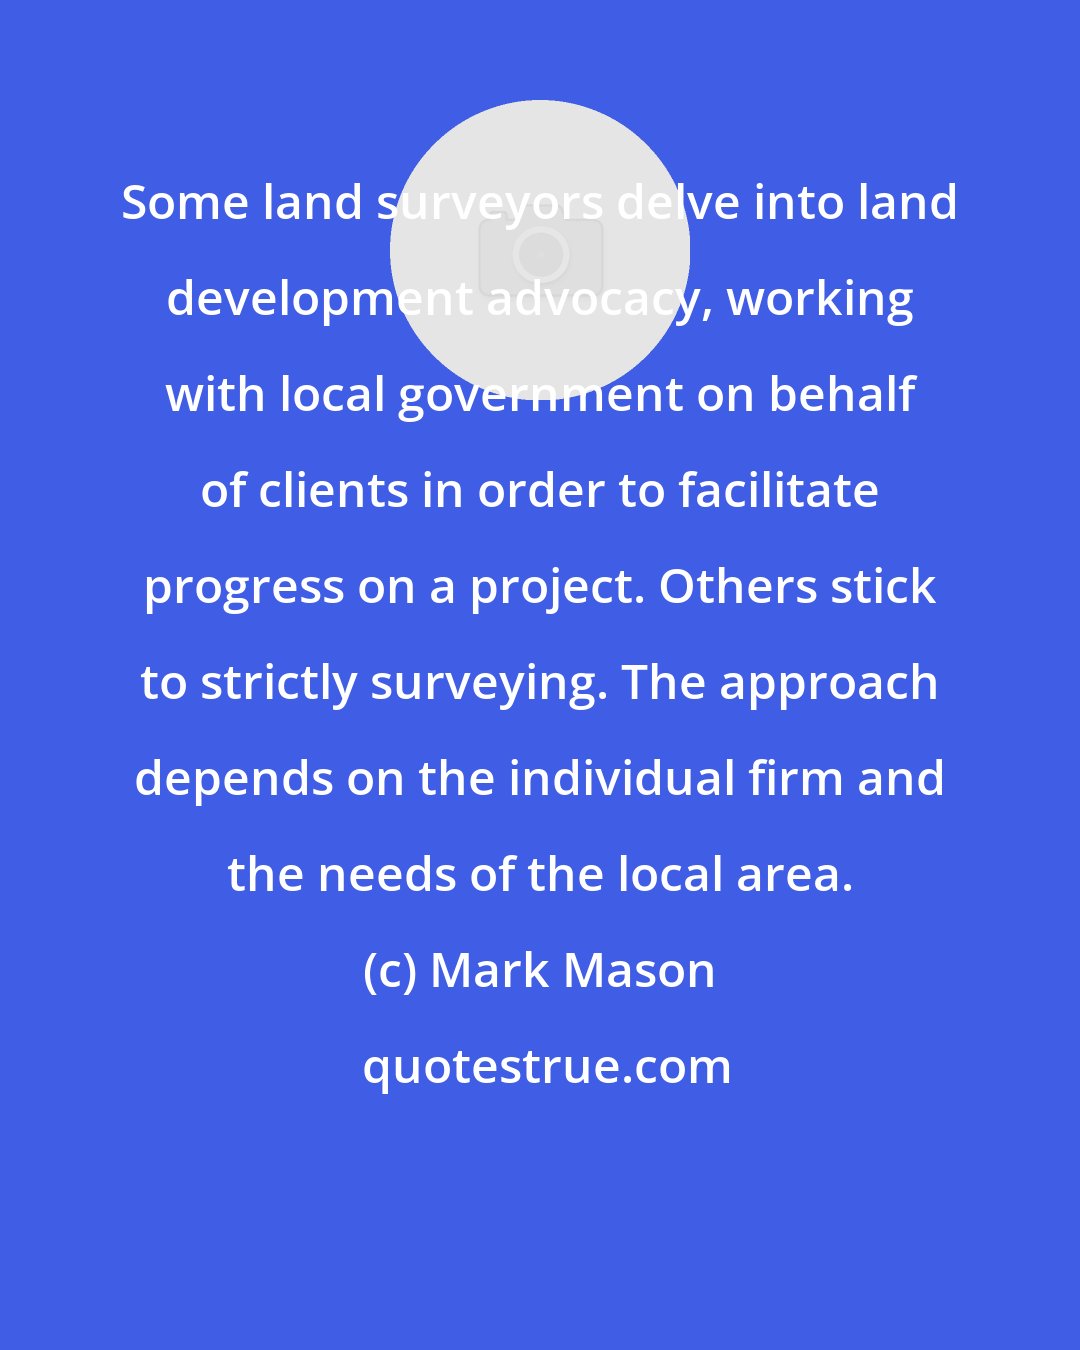 Mark Mason: Some land surveyors delve into land development advocacy, working with local government on behalf of clients in order to facilitate progress on a project. Others stick to strictly surveying. The approach depends on the individual firm and the needs of the local area.